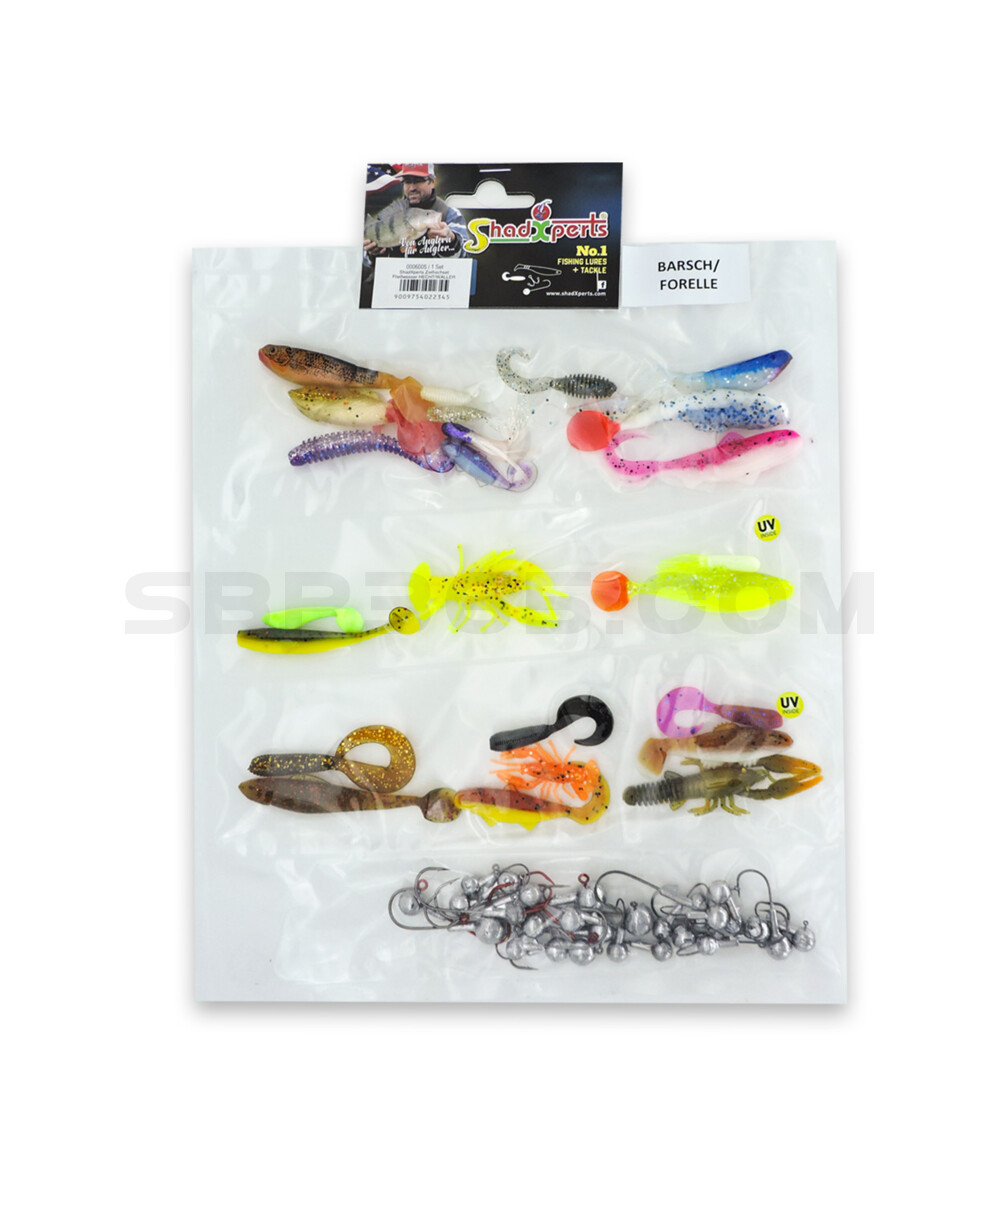 ShadXperts target fish set perch/trout - ca. 26 shads/27 jigs